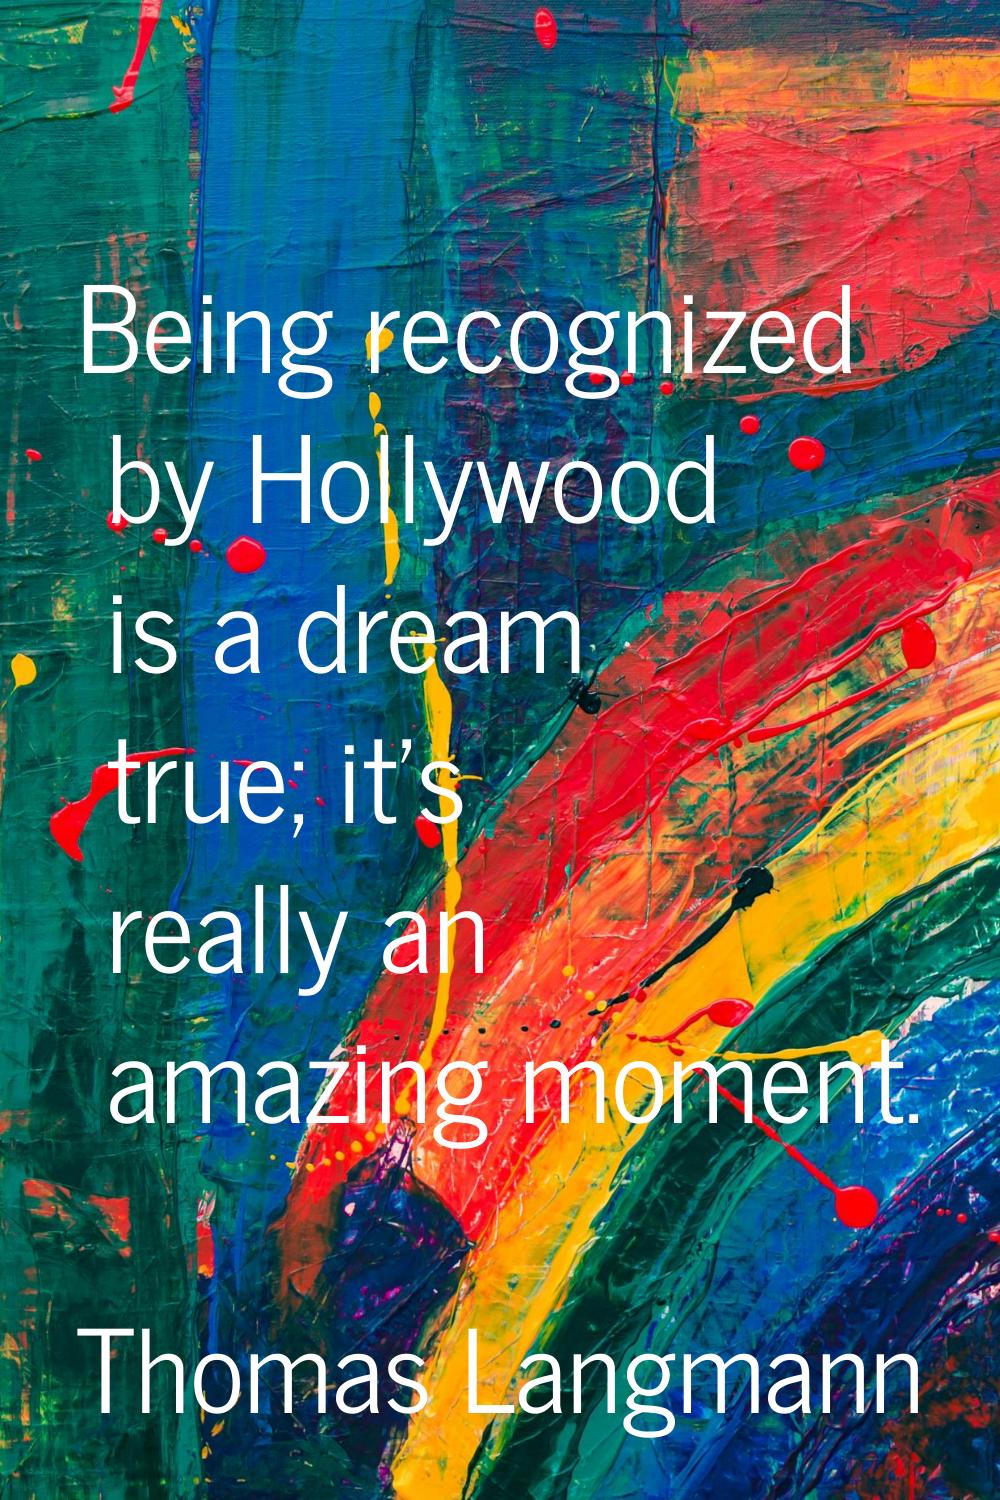 Being recognized by Hollywood is a dream true; it's really an amazing moment.